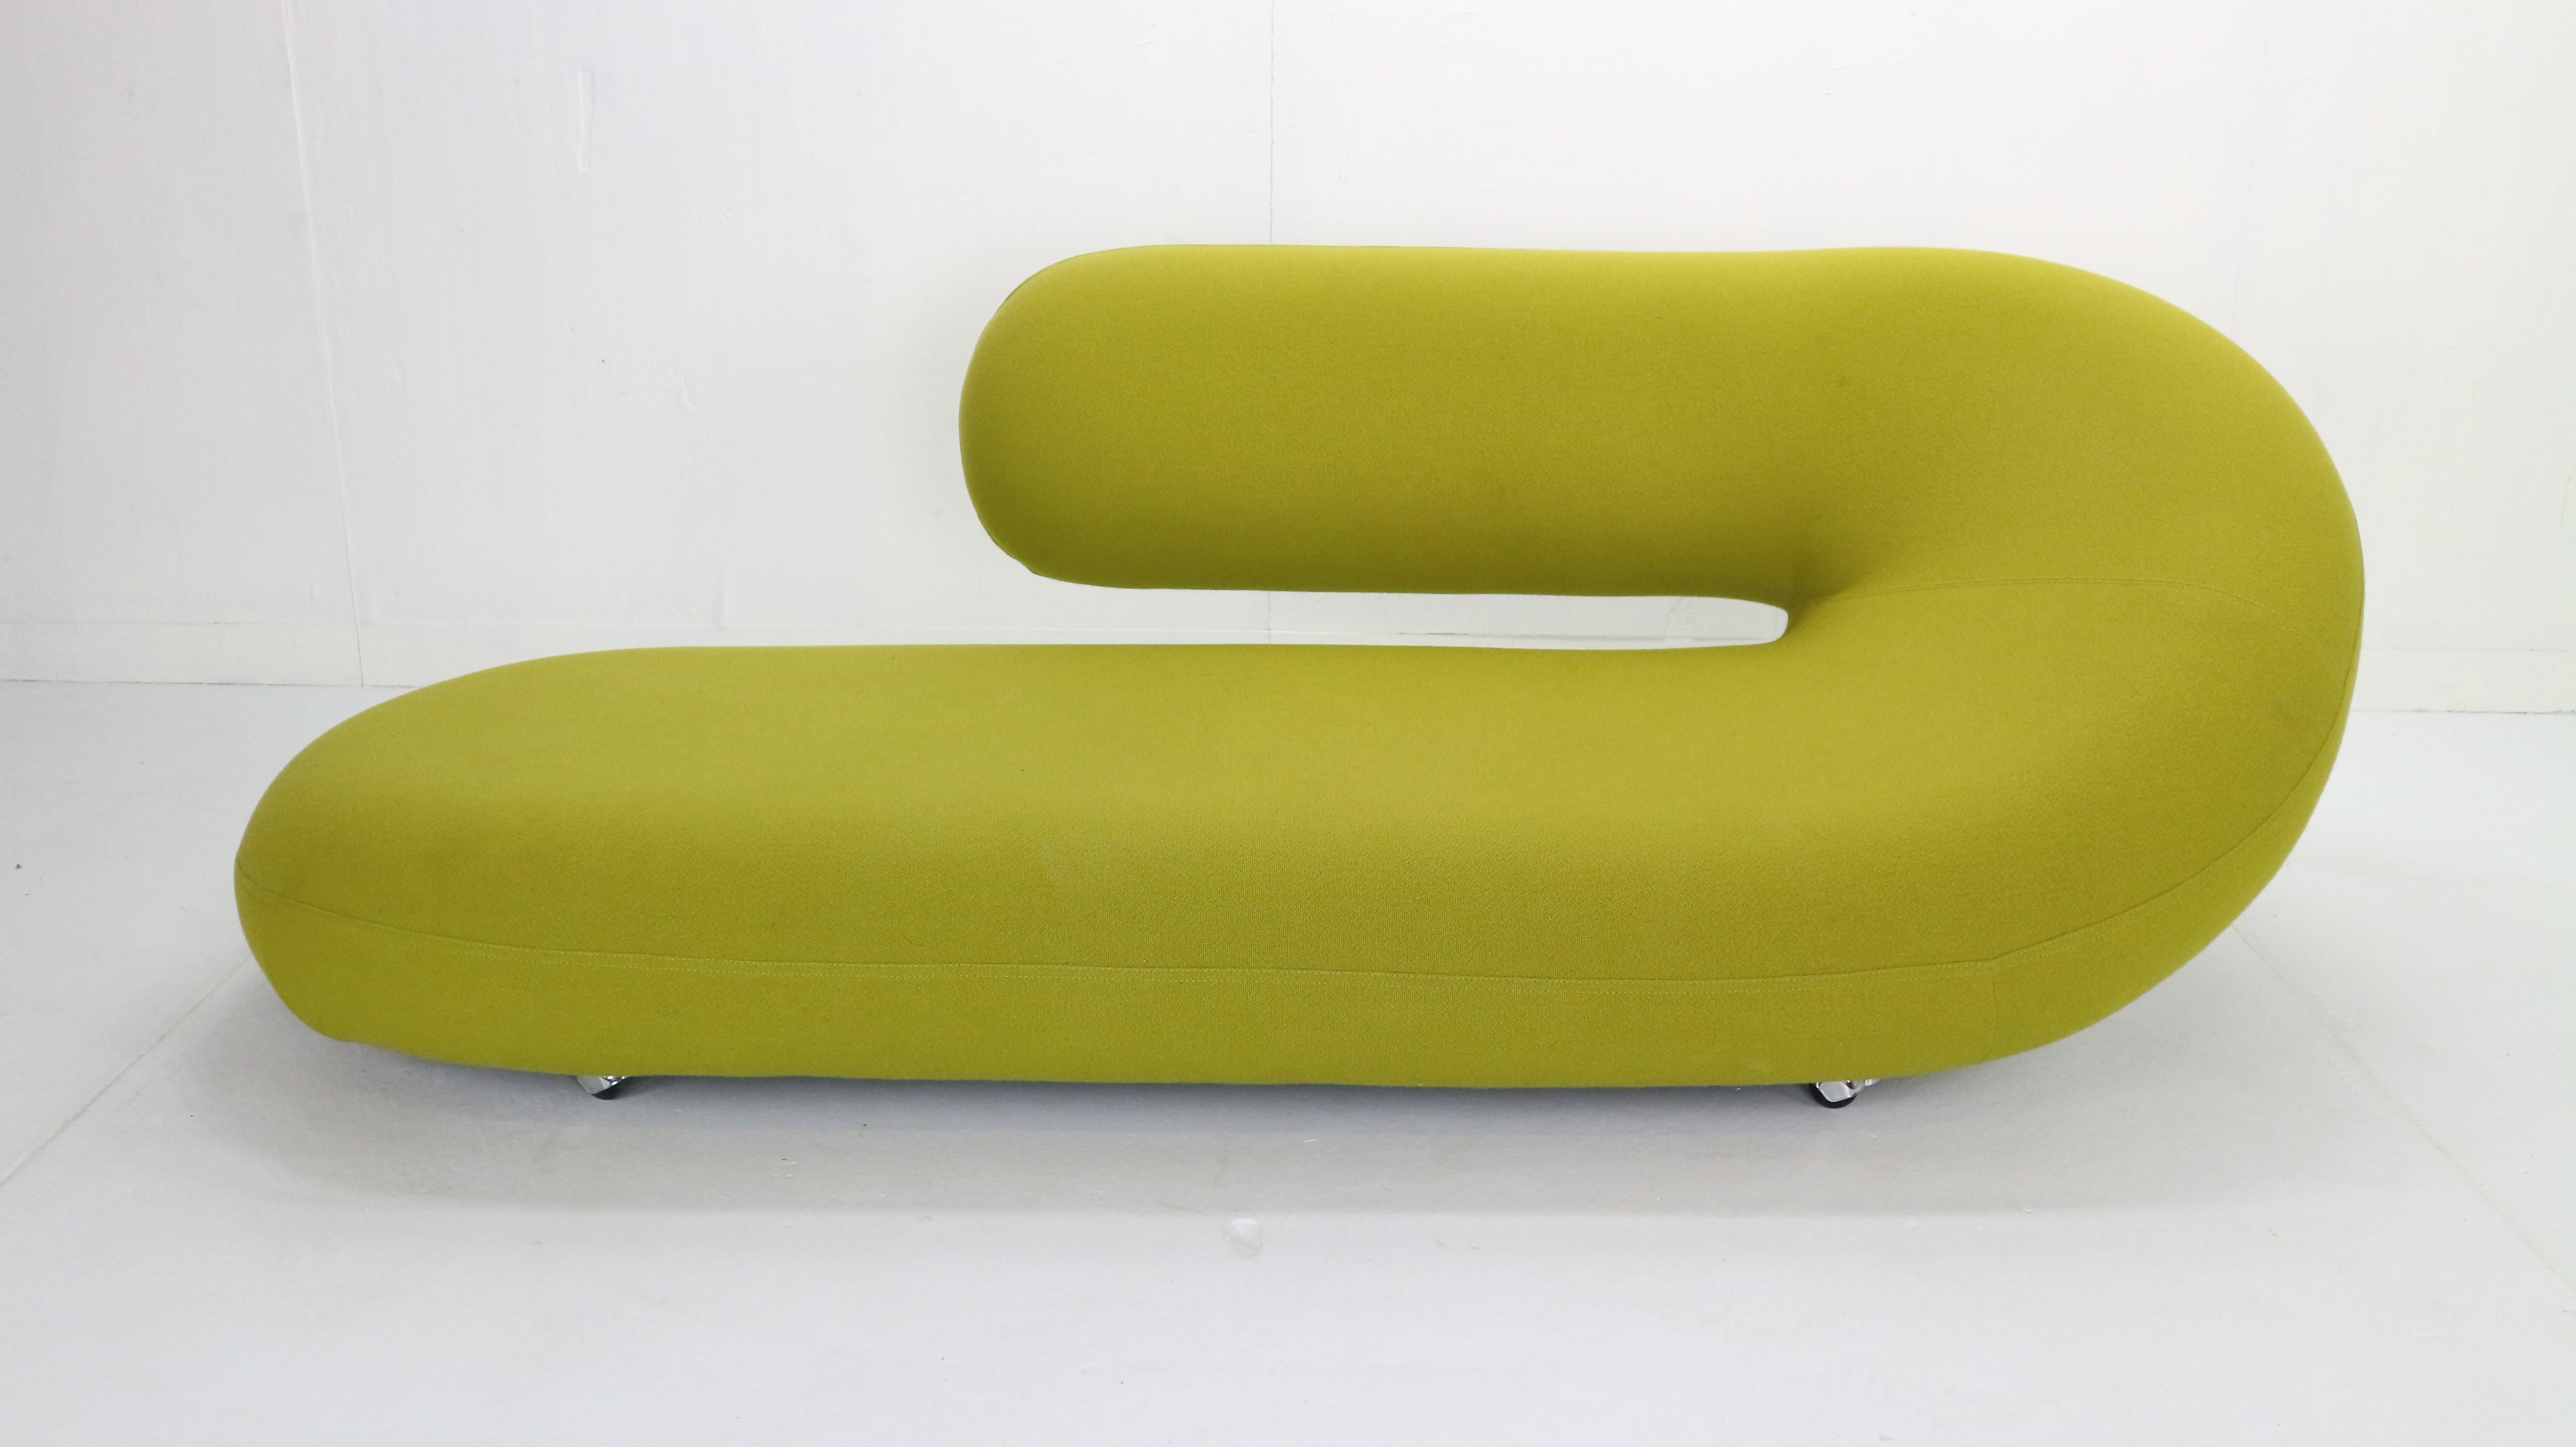 Chaise lounge (contemporary sofa) design by Geoffrey Harcourt for Artifort in 1970, Netherlands.
The Cleopatra sofa is Geoffrey Harcourt's take on the chaise lounge. It was interpreted as a homage to retro style decadence.
A monument in the modern